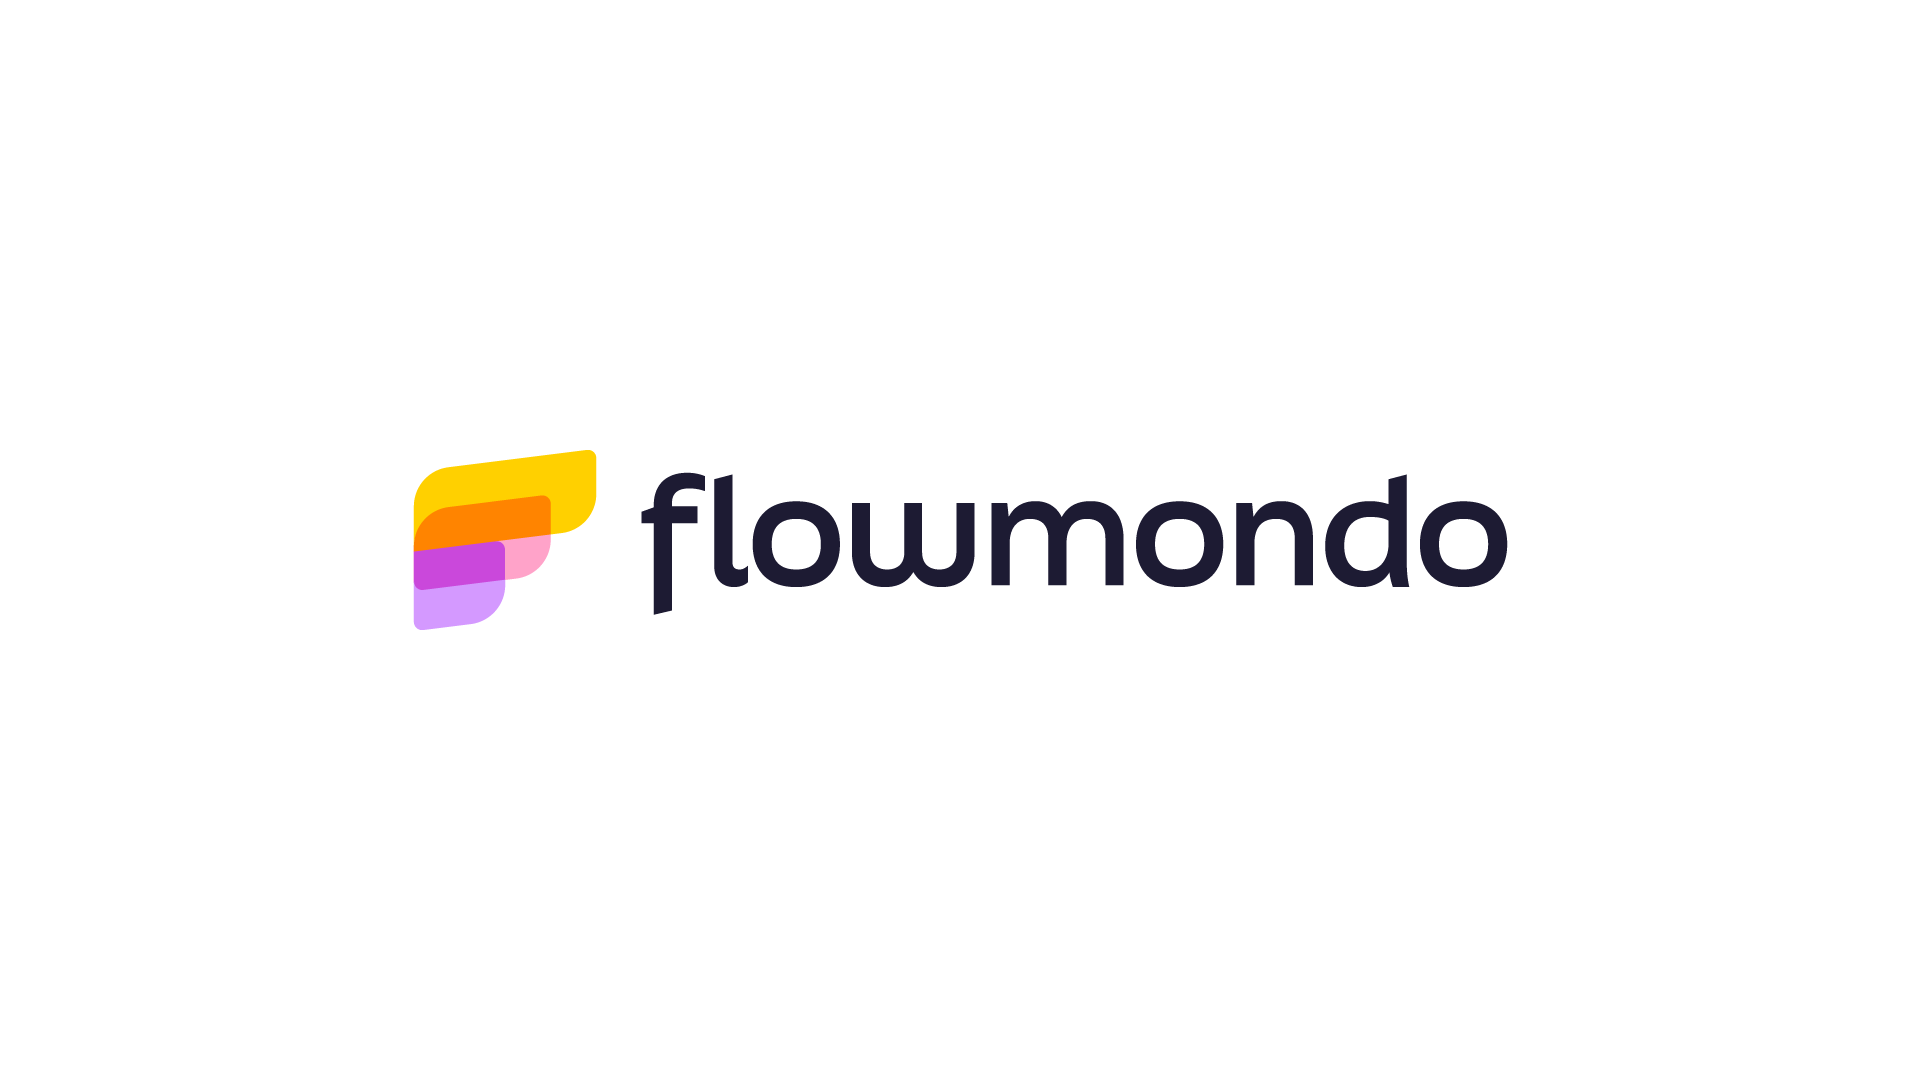 Flowmondo - Colorful F logo for E-commerce Automation Agency, symbolizing vibrant and dynamic automation solutions